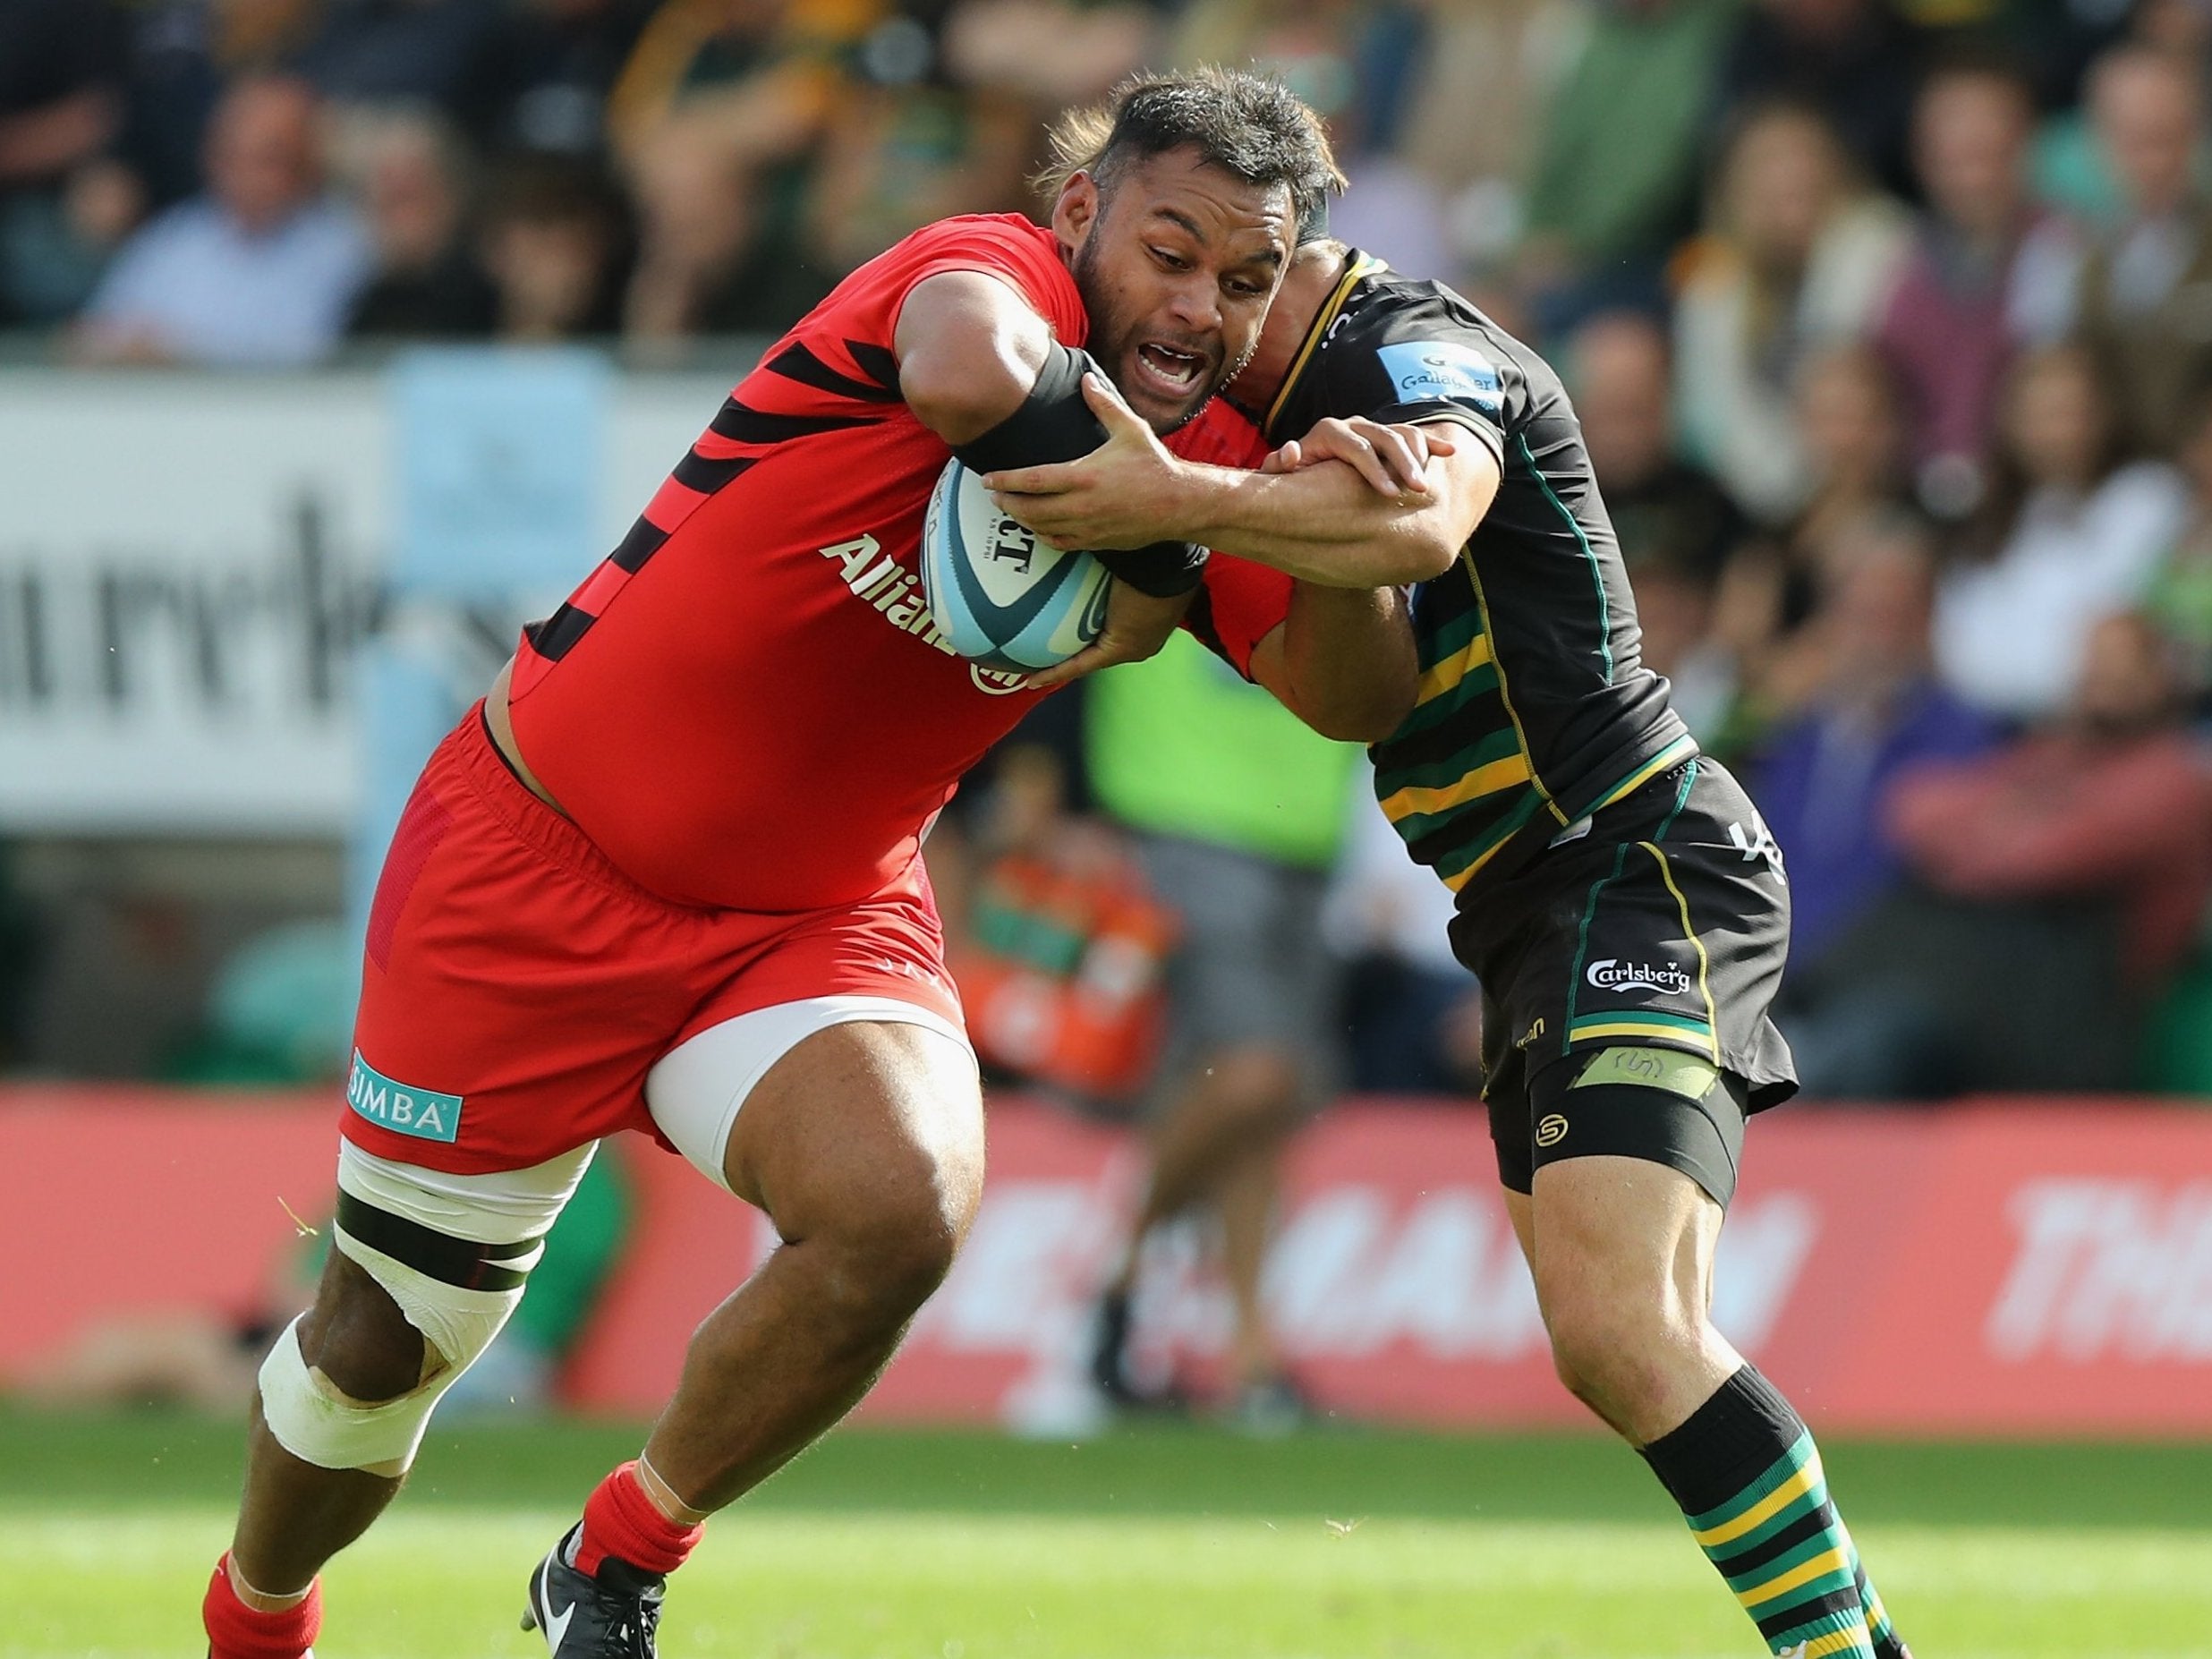 Billy Vunipola made his first start of the season but saw yellow in the second half